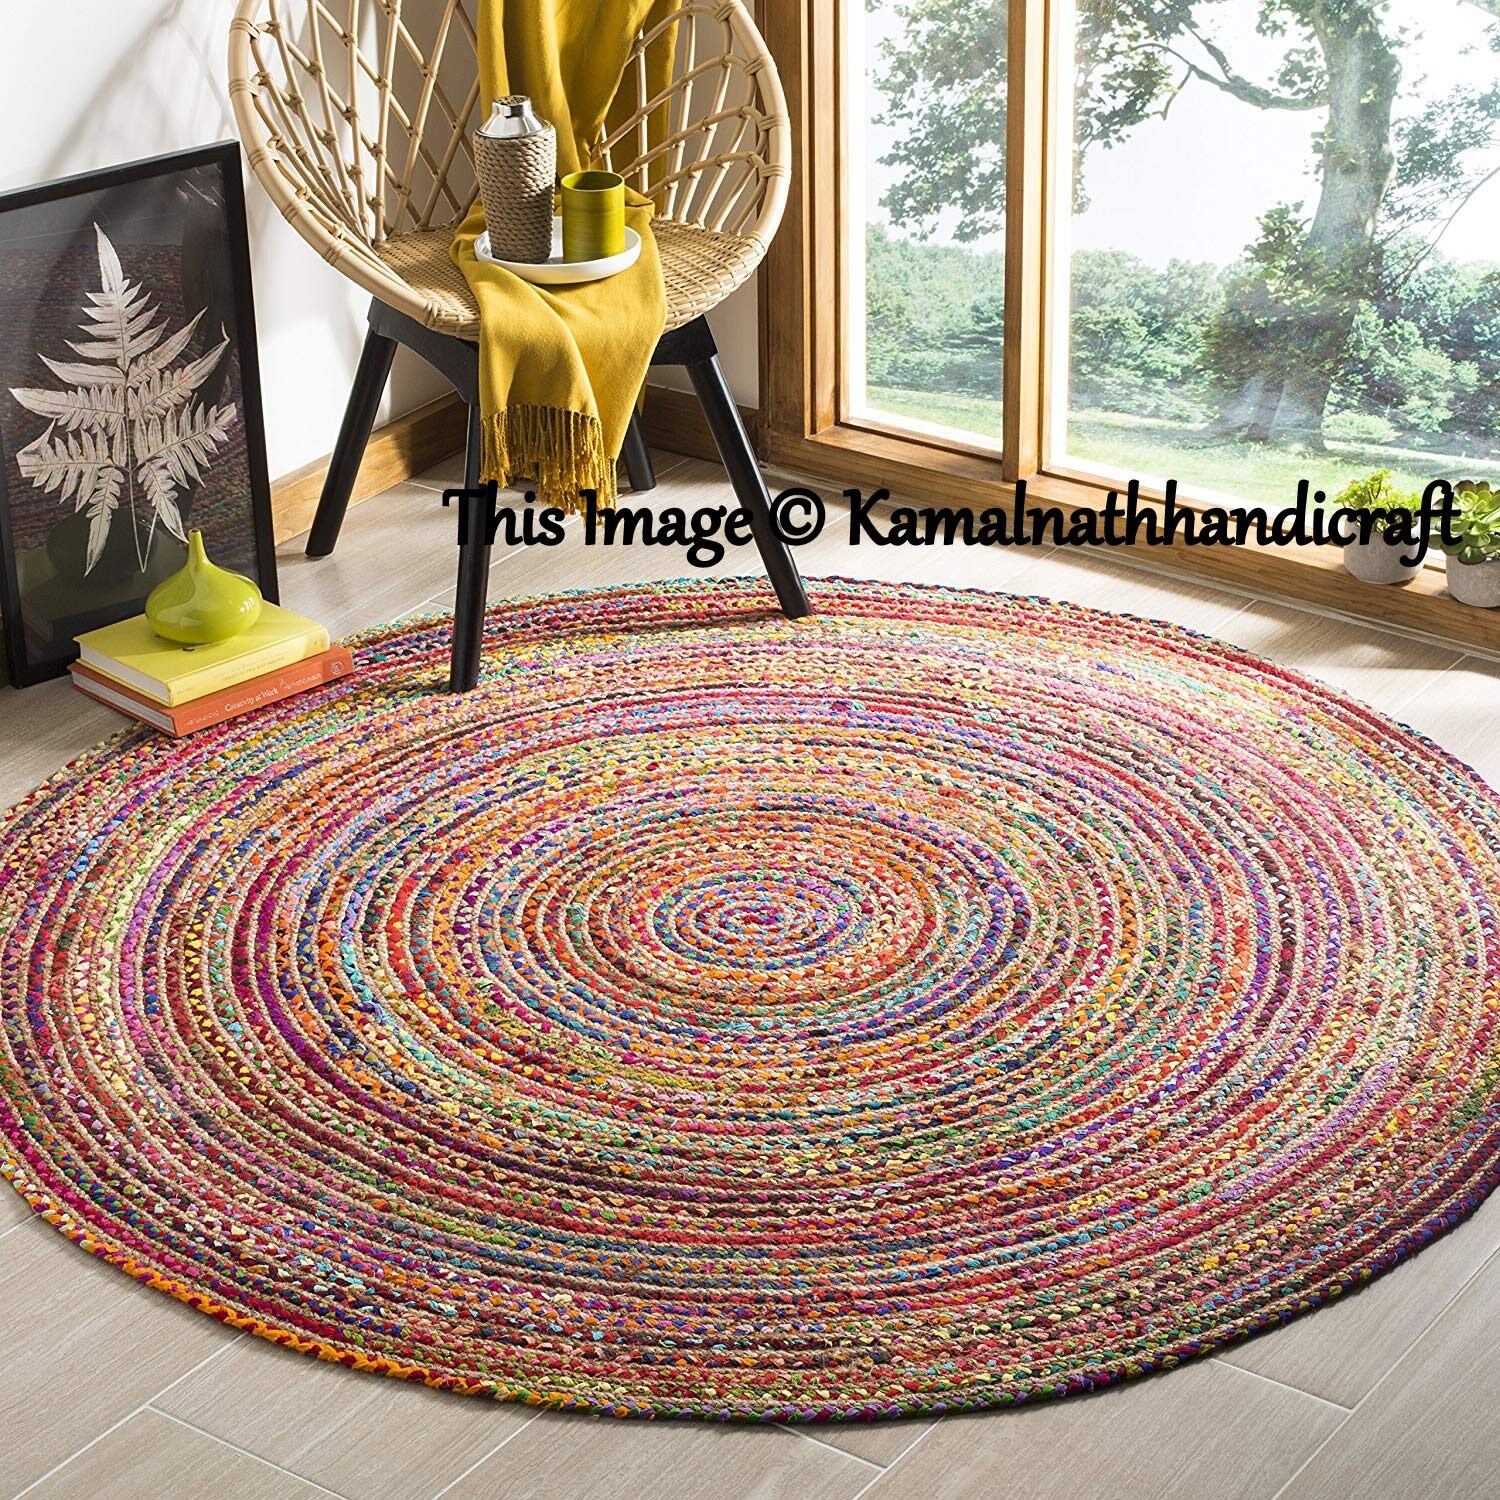 4x4 feet Indian Hand Braided Bohemian Cotton Chindi Area Rug Multi Color Home Decor Rugs Cotton Area Rugs Round Shape Multi Braided Rug Rag